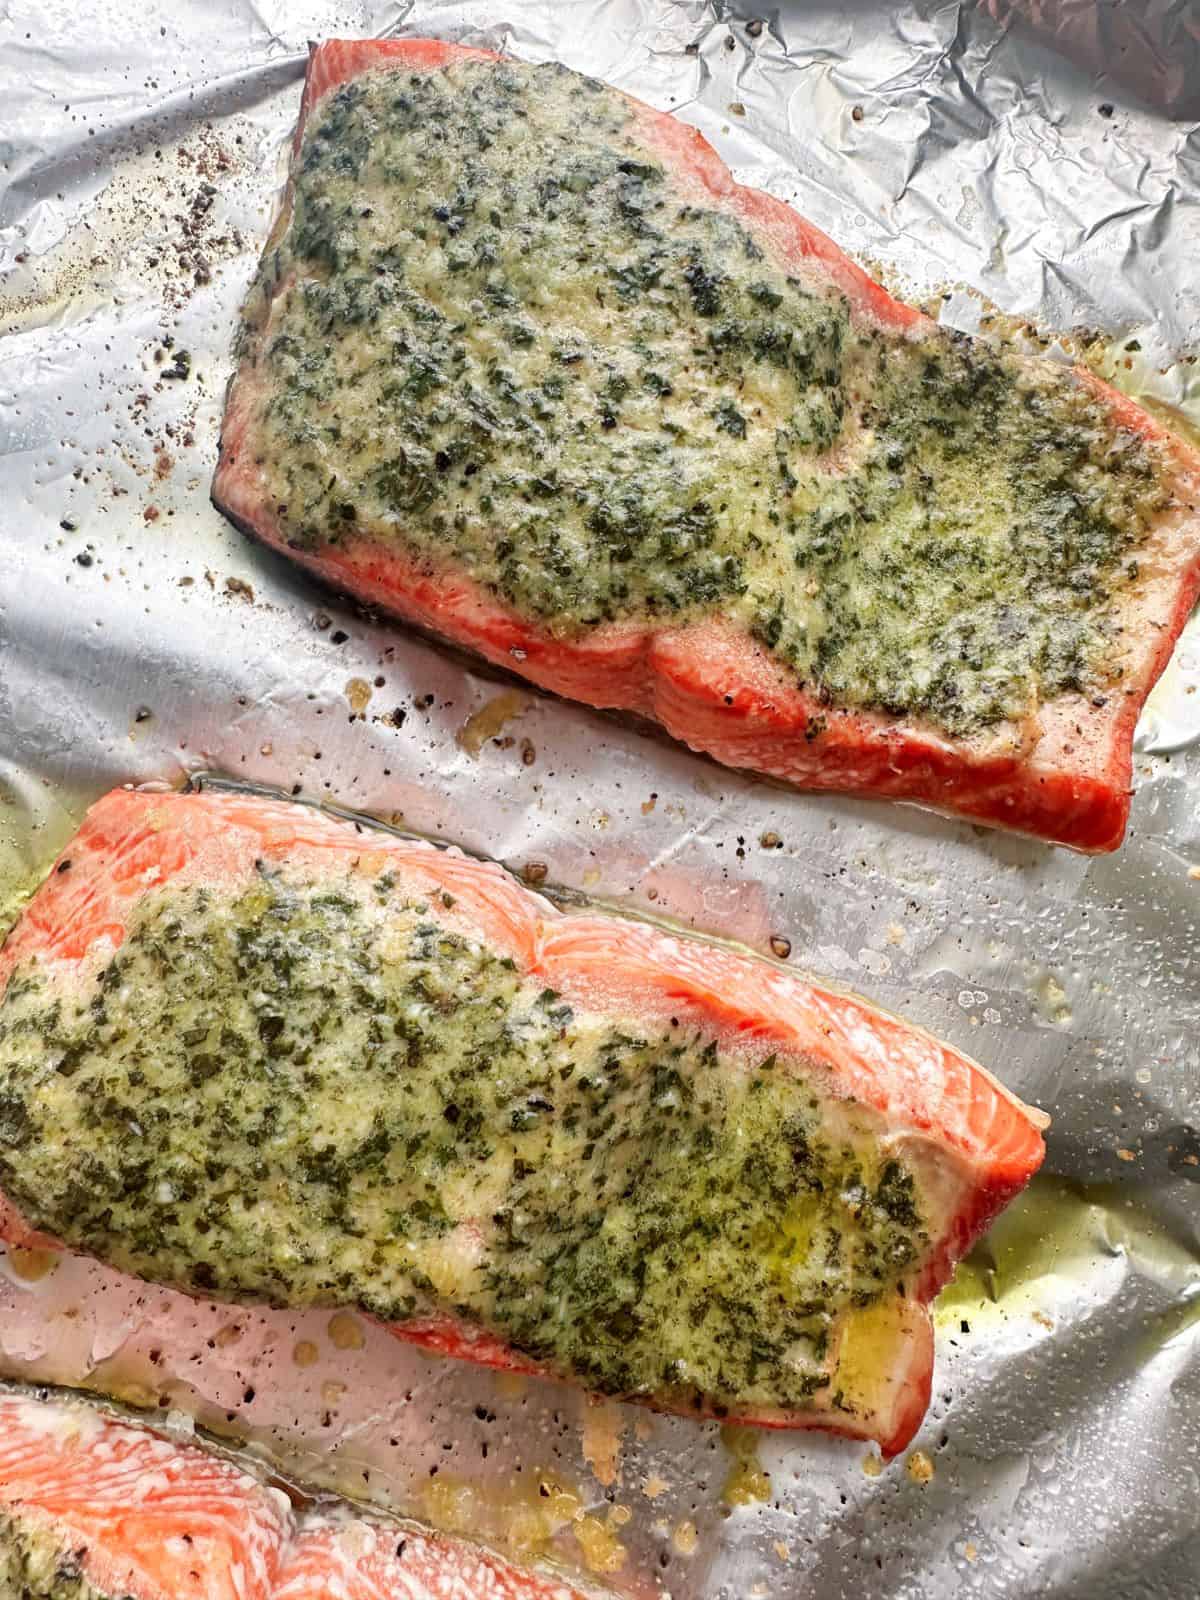 Salmon fillets topped with melted pesto butter on a foil baking sheet.